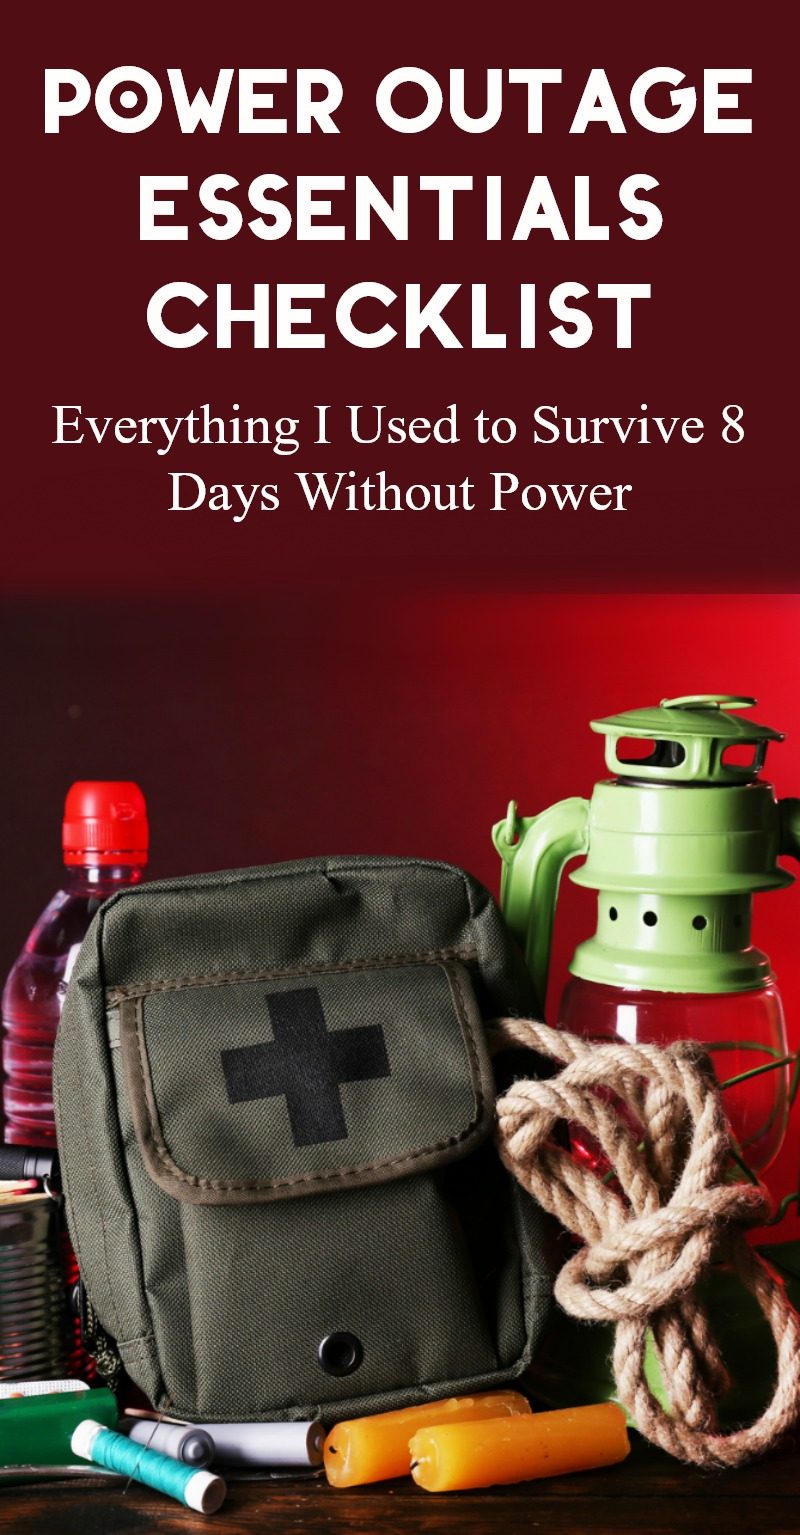 I'm sharing everything I used to survive 8 days without power, plus a few things that I'm grabbing for the next time. I suggest stocking up BEFORE the lights go out!